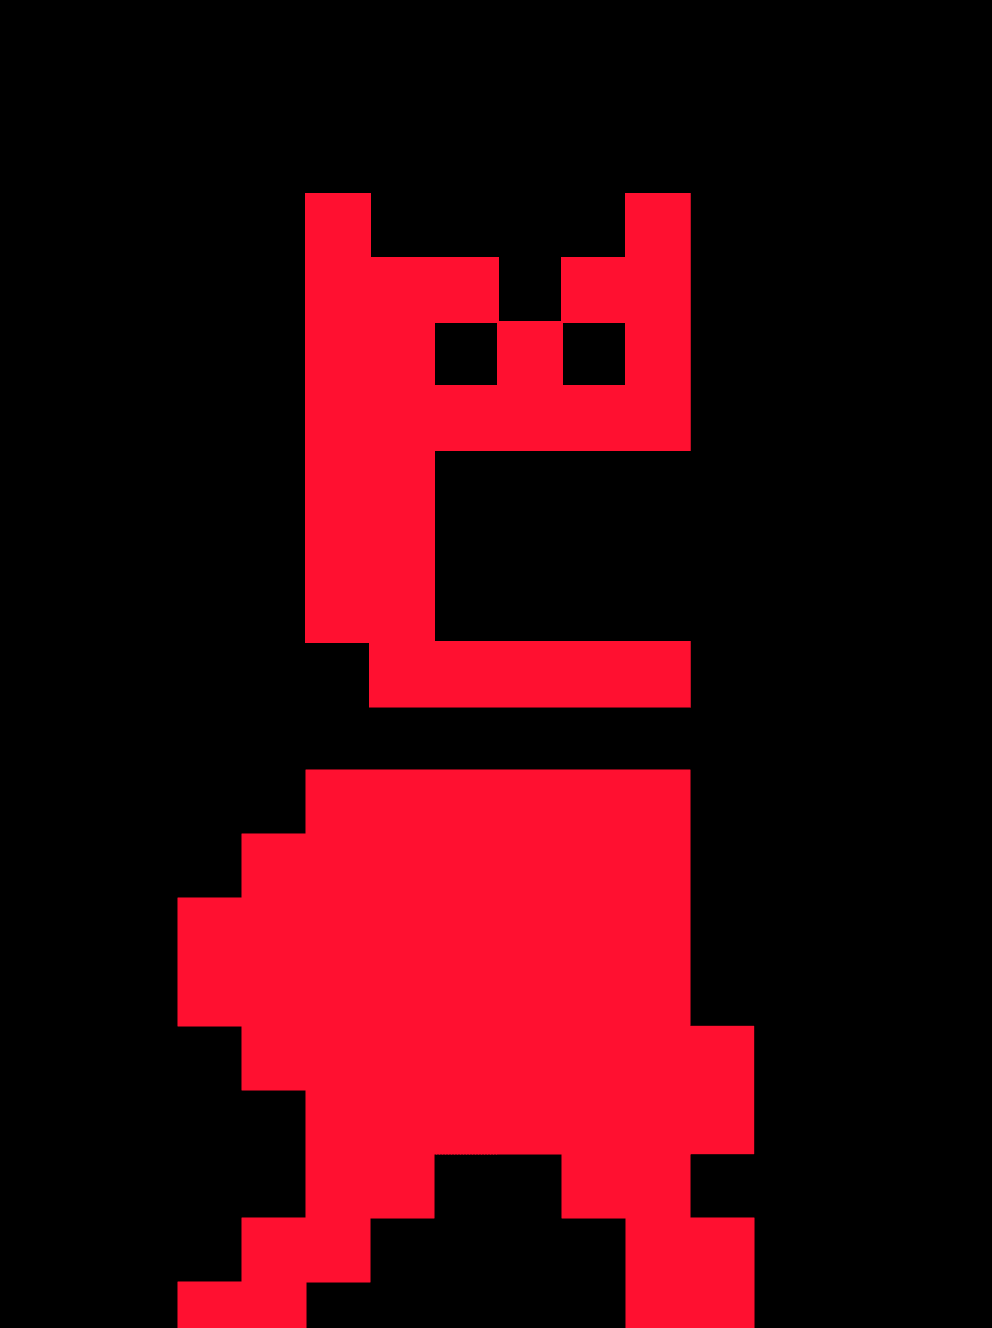 Bitman, who looks a bit like a red, pixelated Batman but instead of a penchant for stopping crime he has a penchant for eradicating bad user experience and lazy design